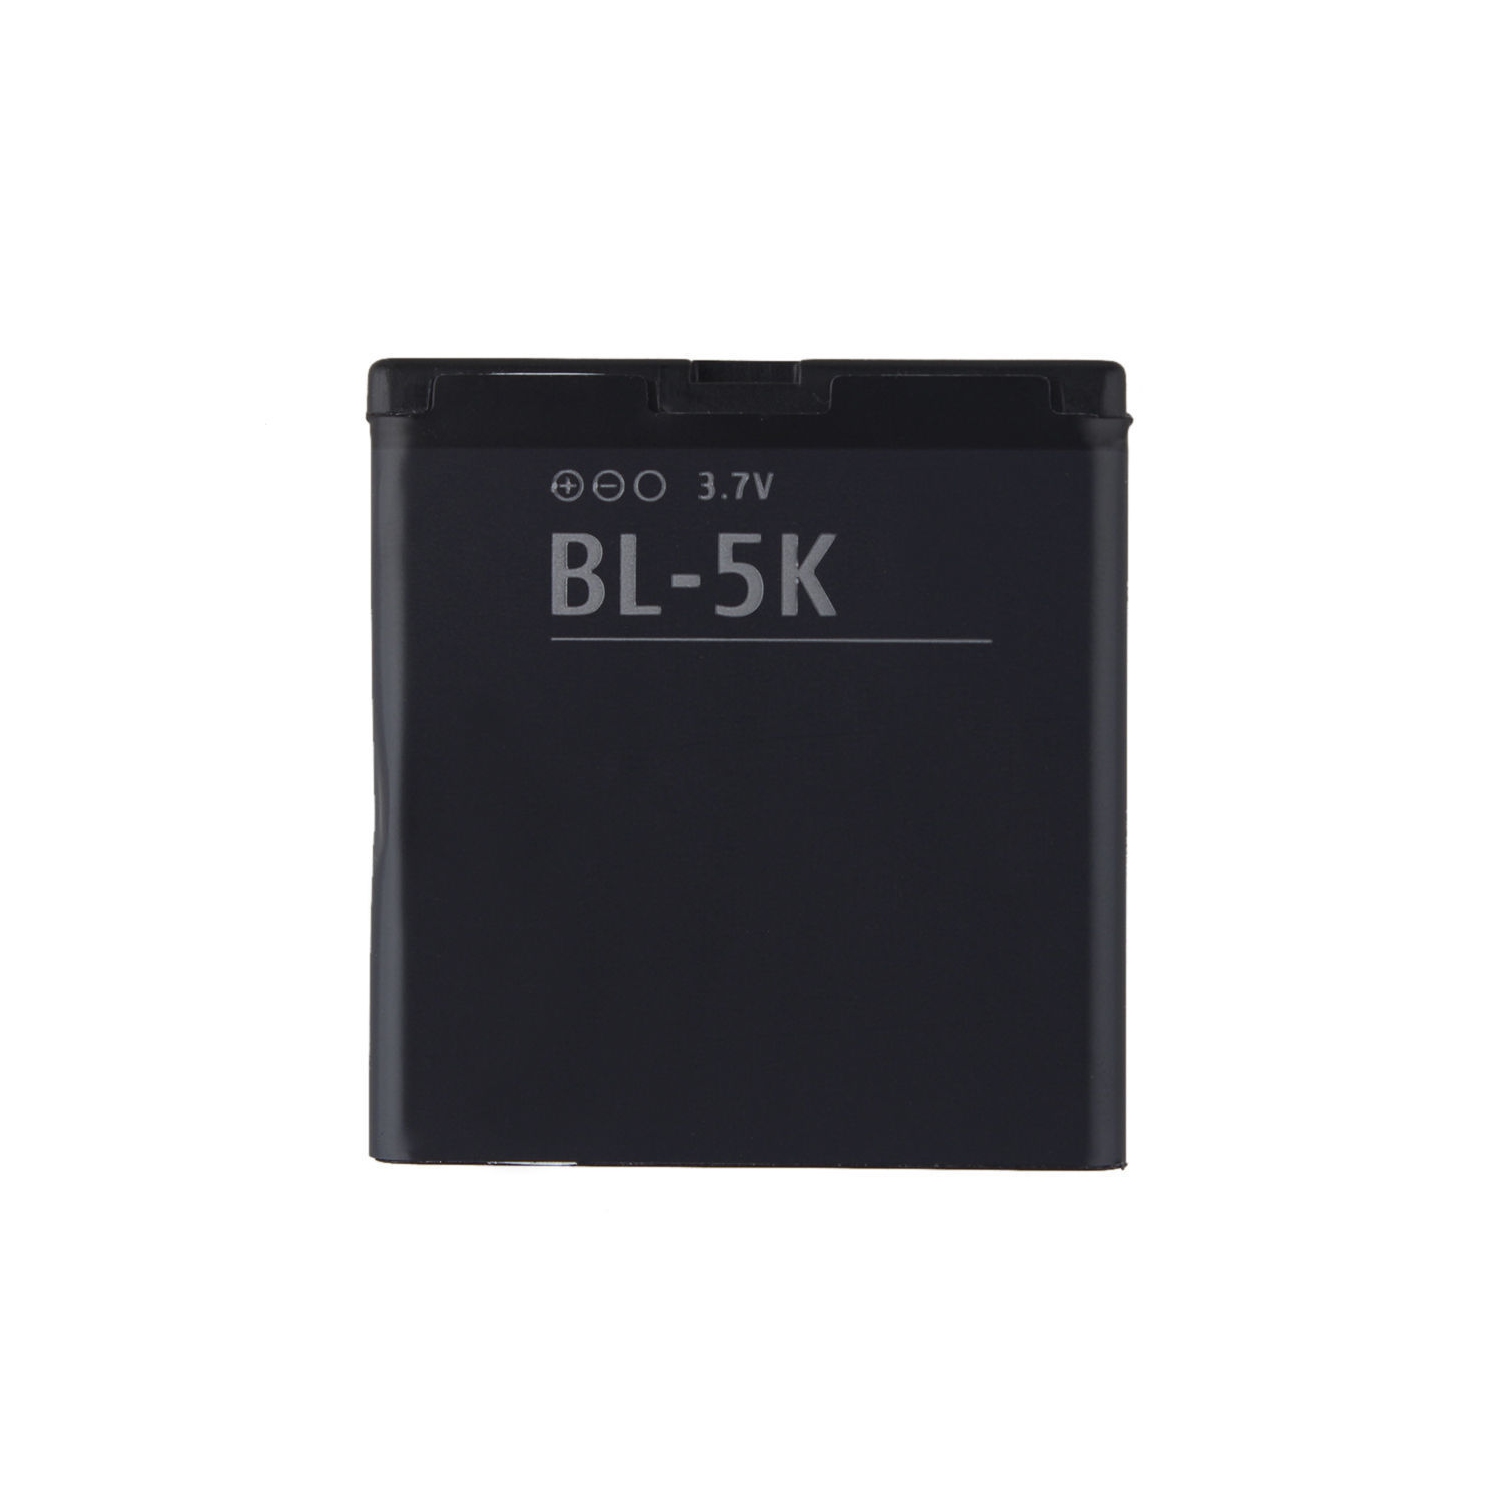 BL-5K Replacement Battery for Nokia N85 N86 N87 Astound 701 X7-00 C7 C7-00